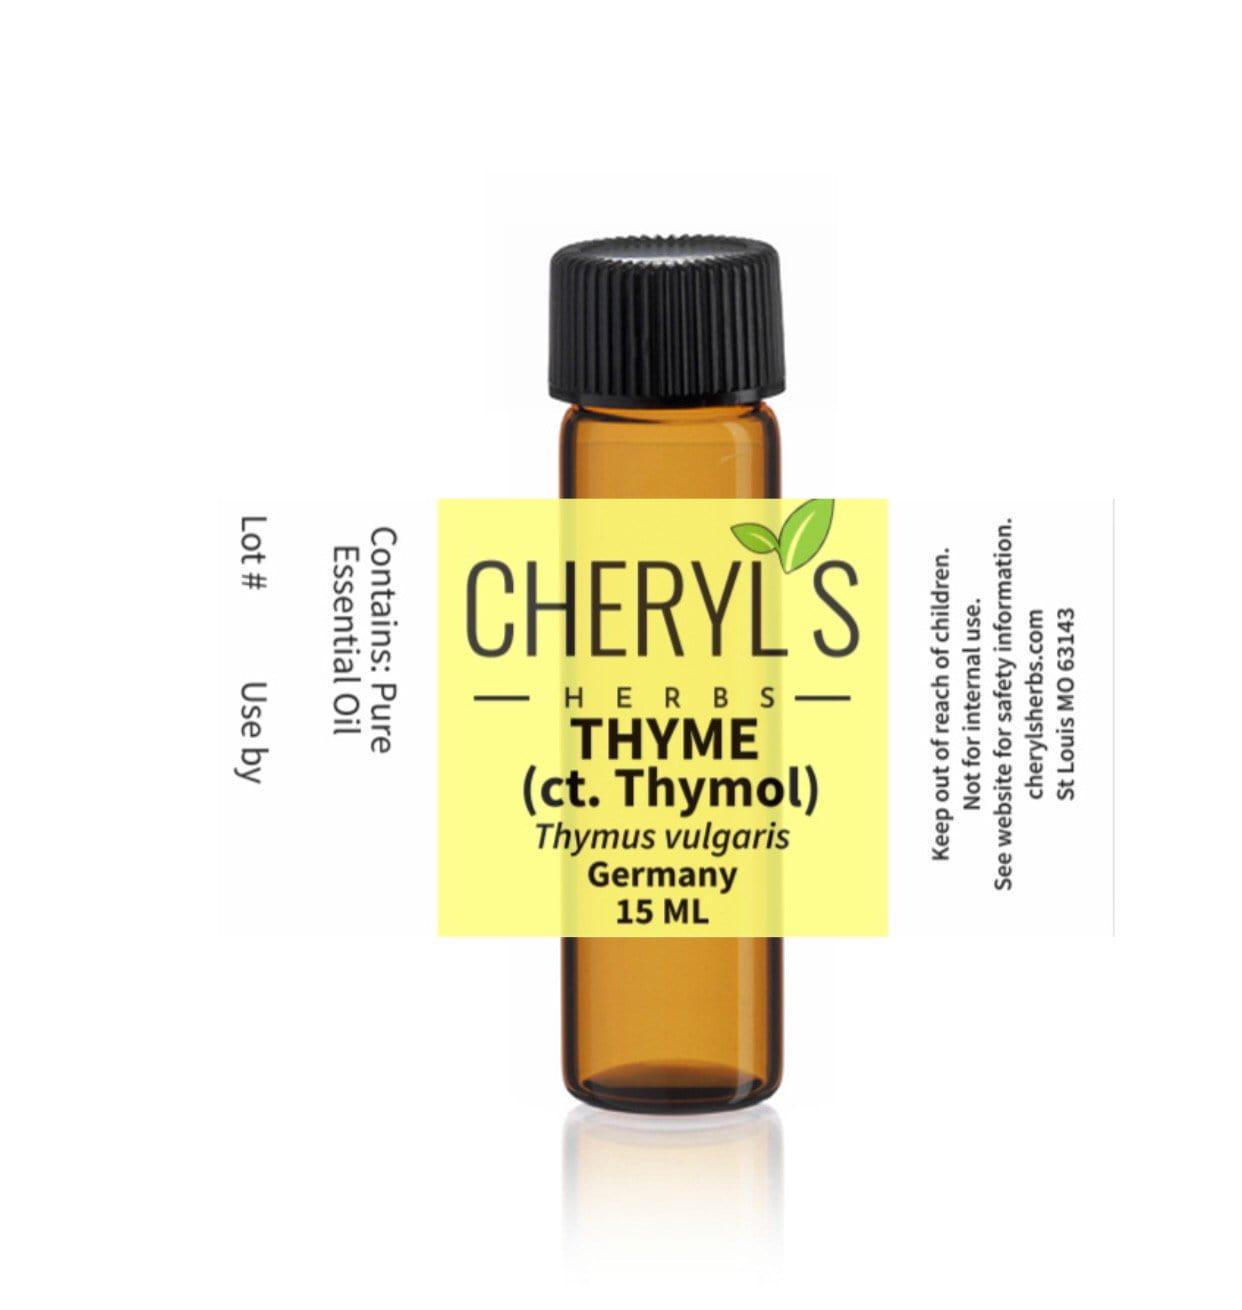 THYME ct. Thymol, RED ESSENTIAL OIL - Cheryls Herbs